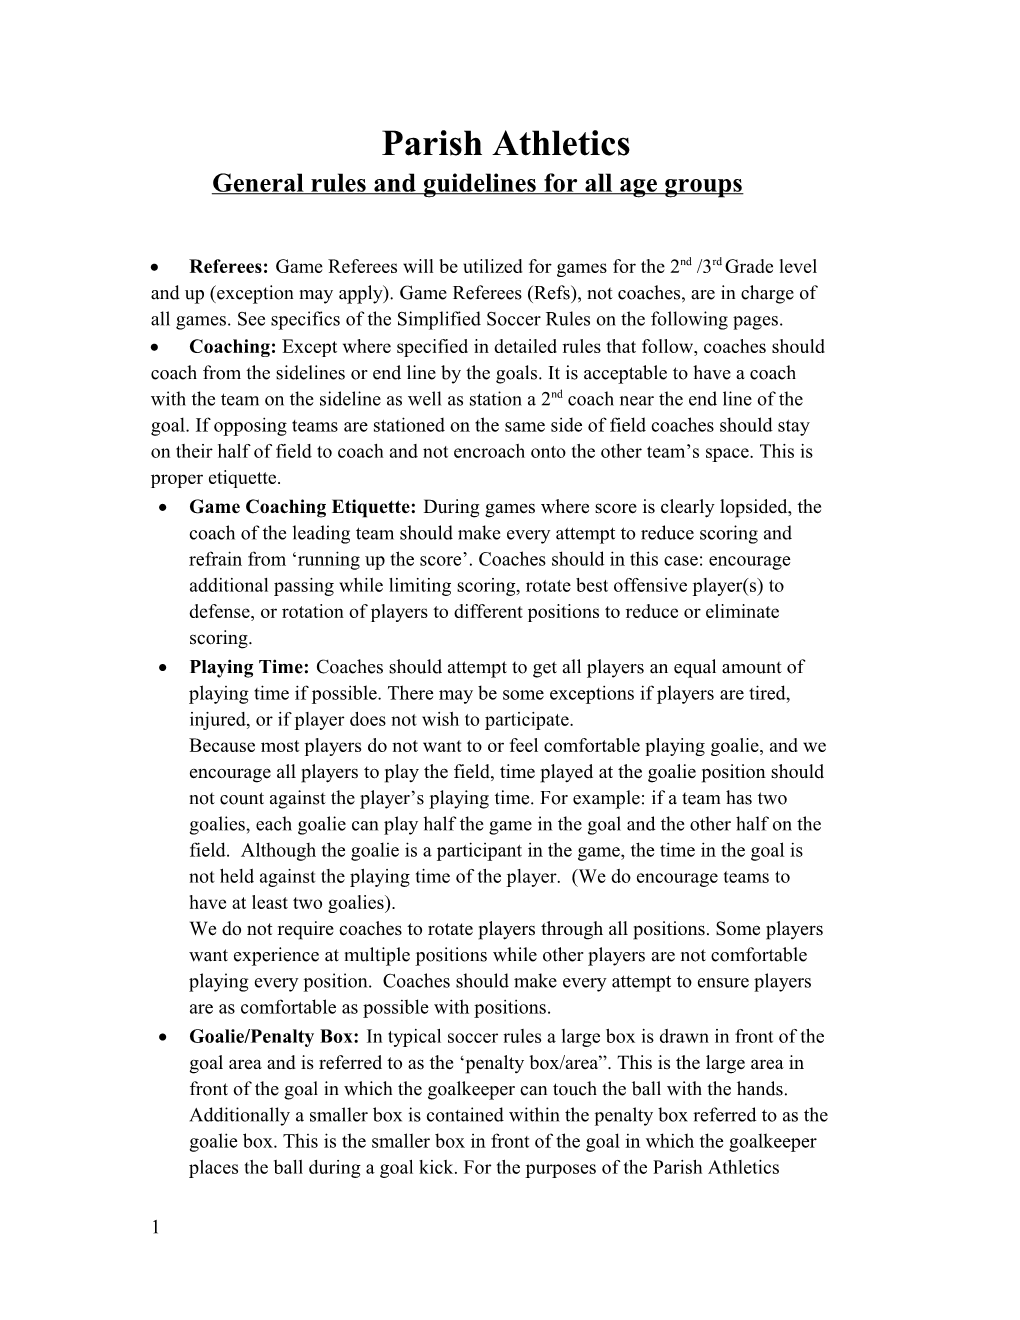 General Rules and Guidelines for All Age Groups